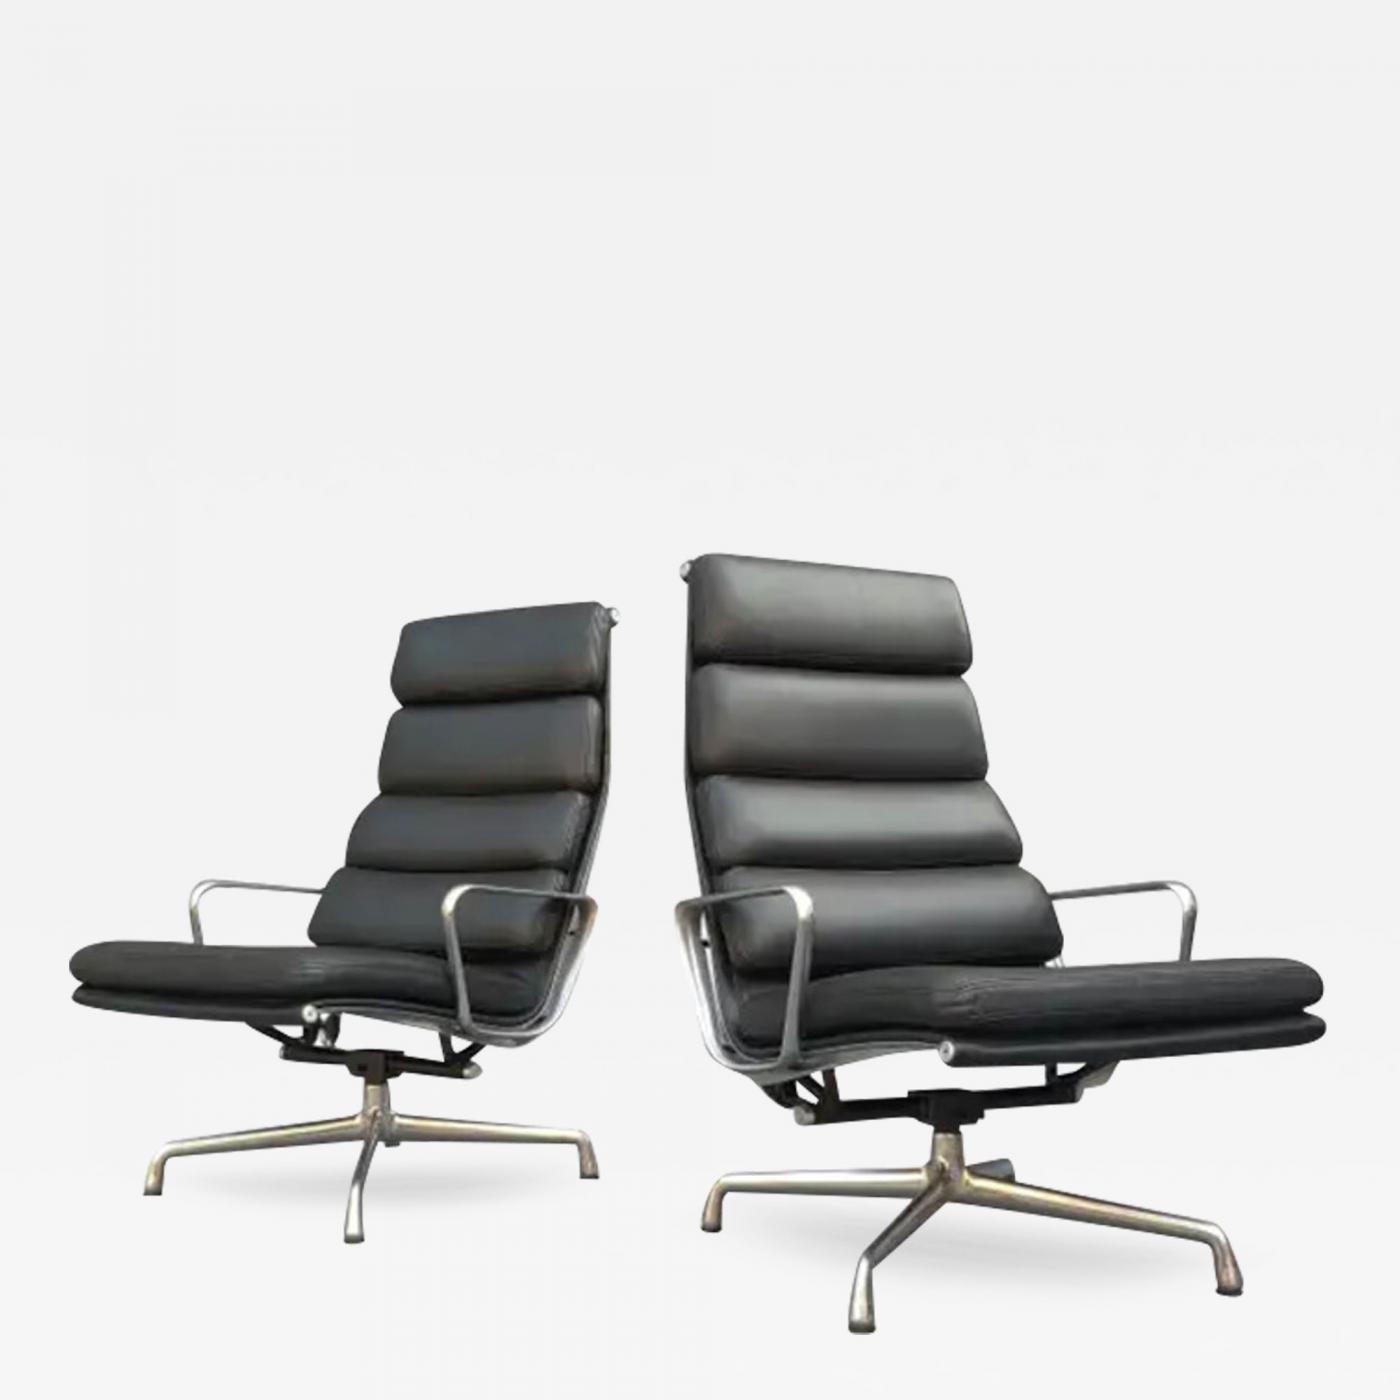 https://cdn.incollect.com/sites/default/files/zoom/Charles-Ray-Eames-Pair-of-Charles-Ray-Eames-Herman-Miller-Black-Leather-Soft-Pad-Lounge-Chairs-661215-3223637.jpg